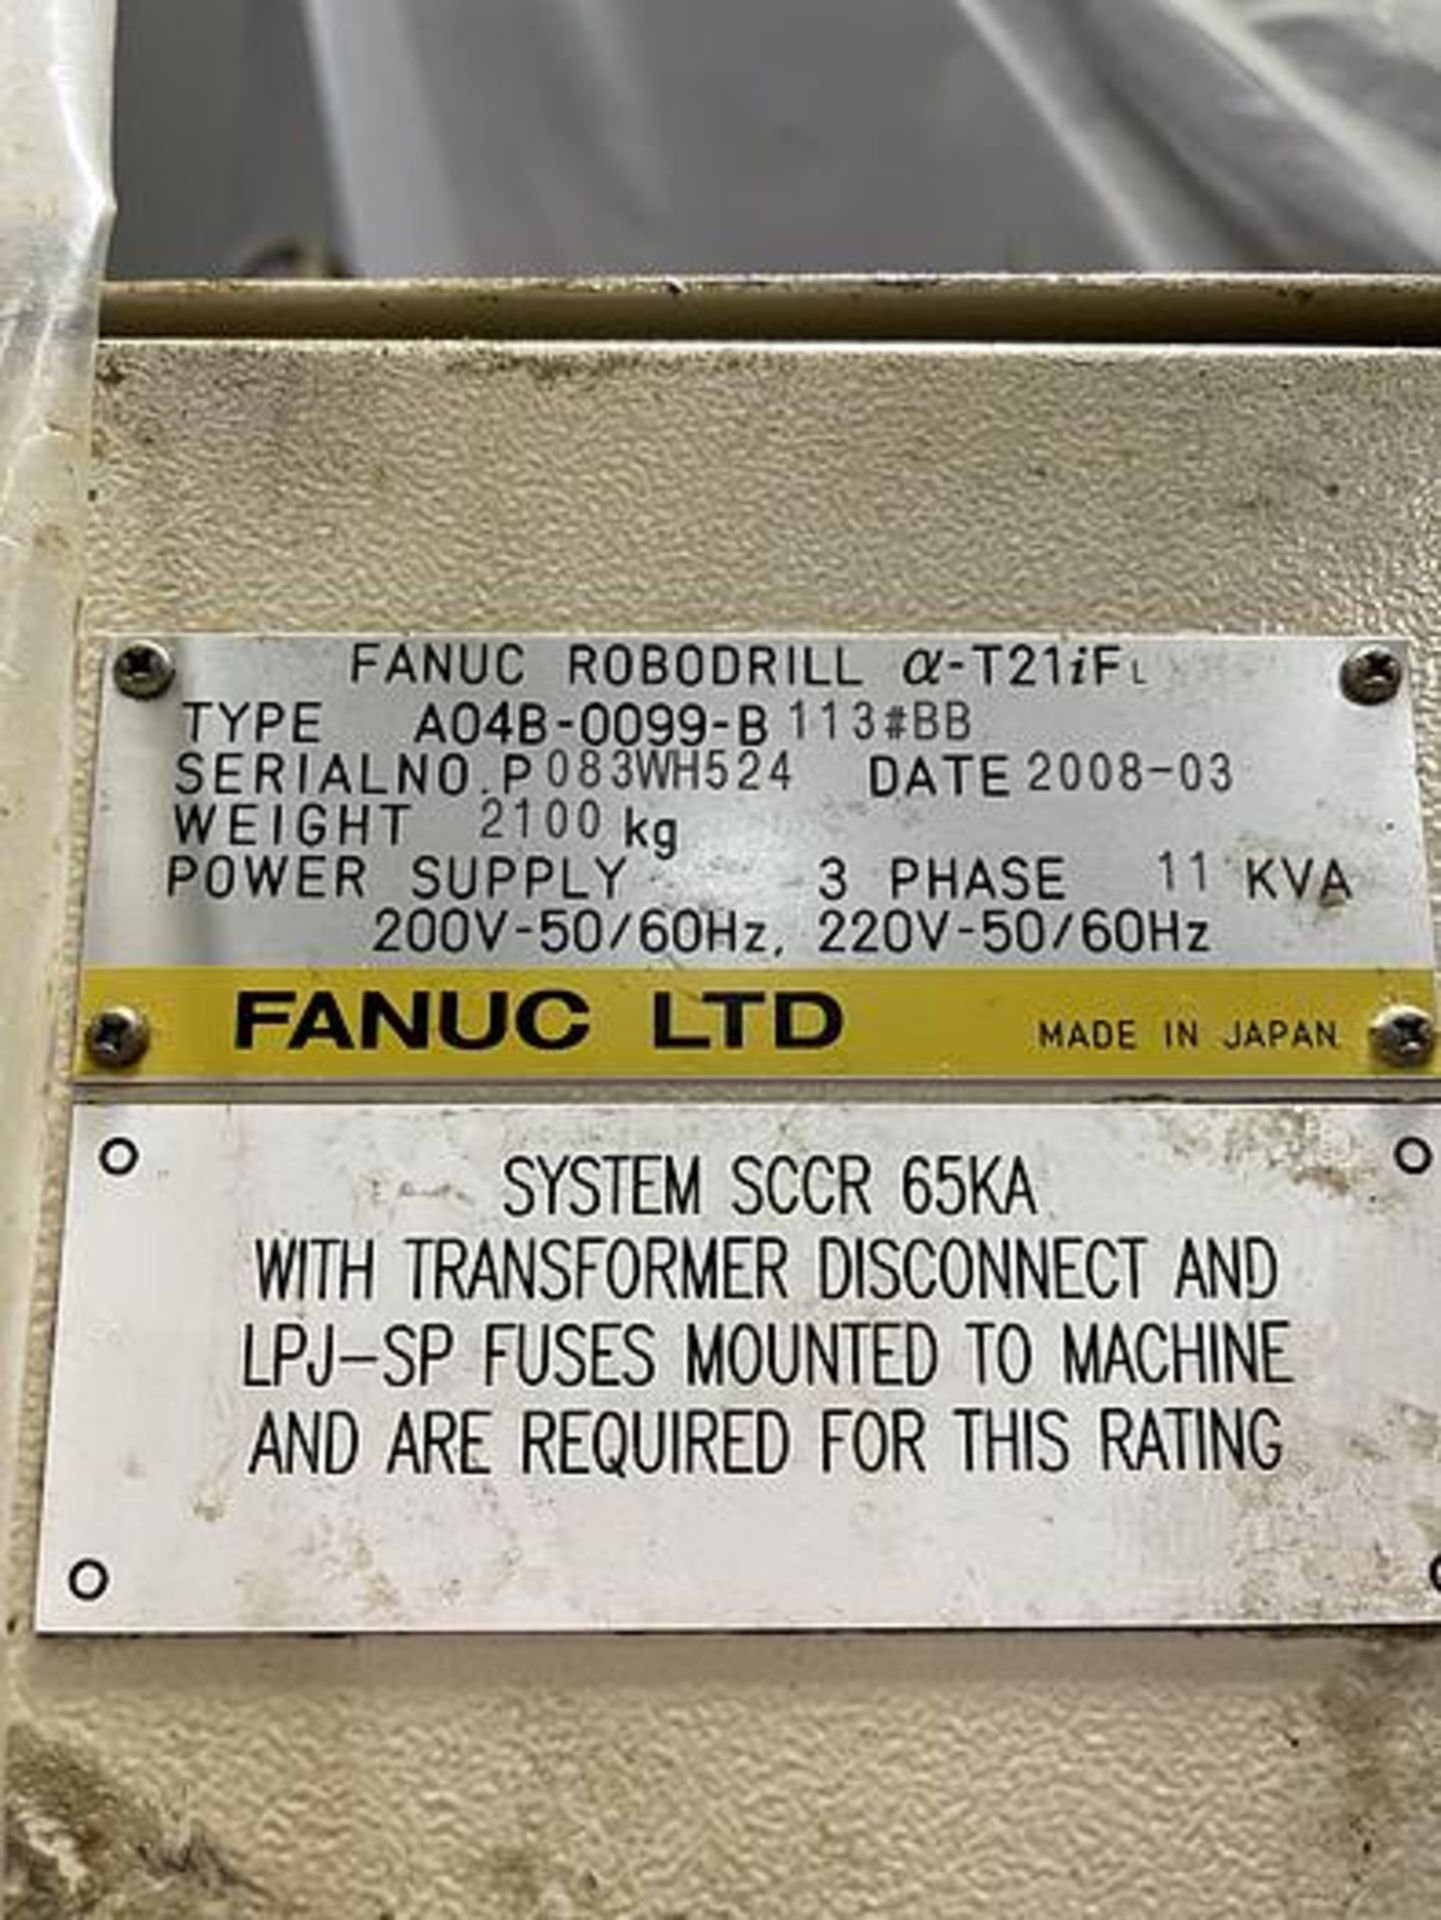 FANUC ROBODRILL T21iF VERTICAL MACHIING CENTER WITH 4TH AXIS TSUDACOMA ROTARY 4TH AXIS ROTARY TABLE - Image 9 of 13